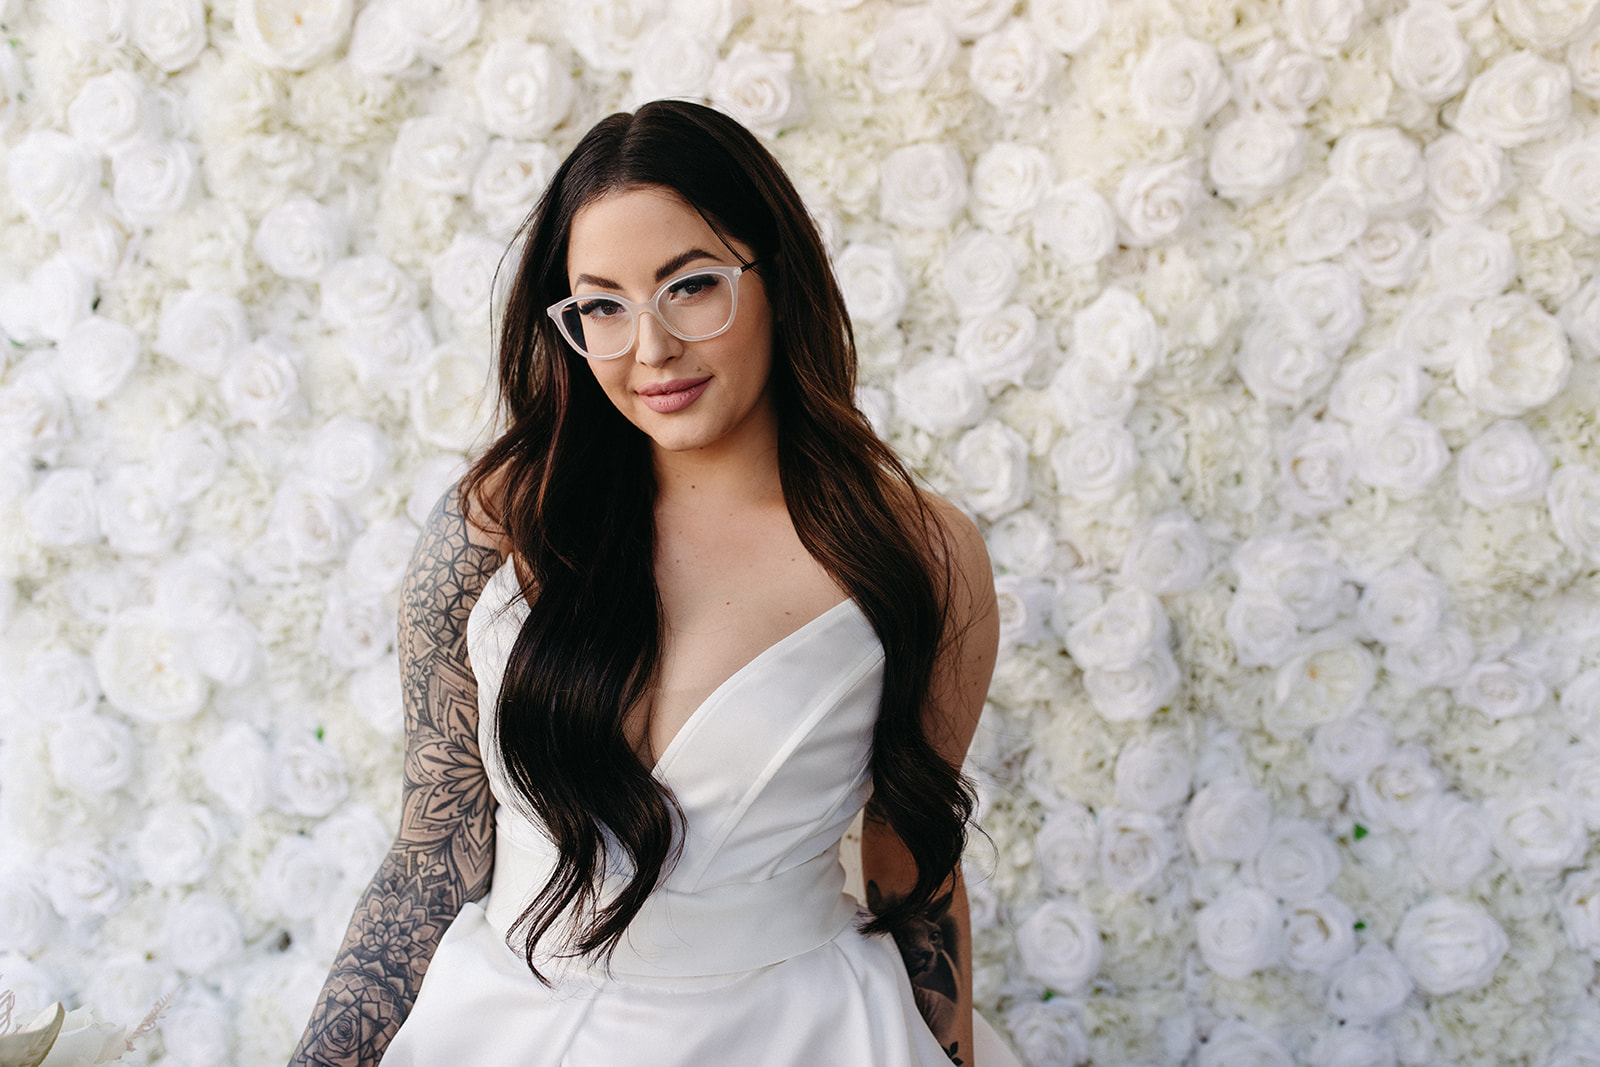 Bride in Front of White Floral Wall at Micro-Wedding Reception